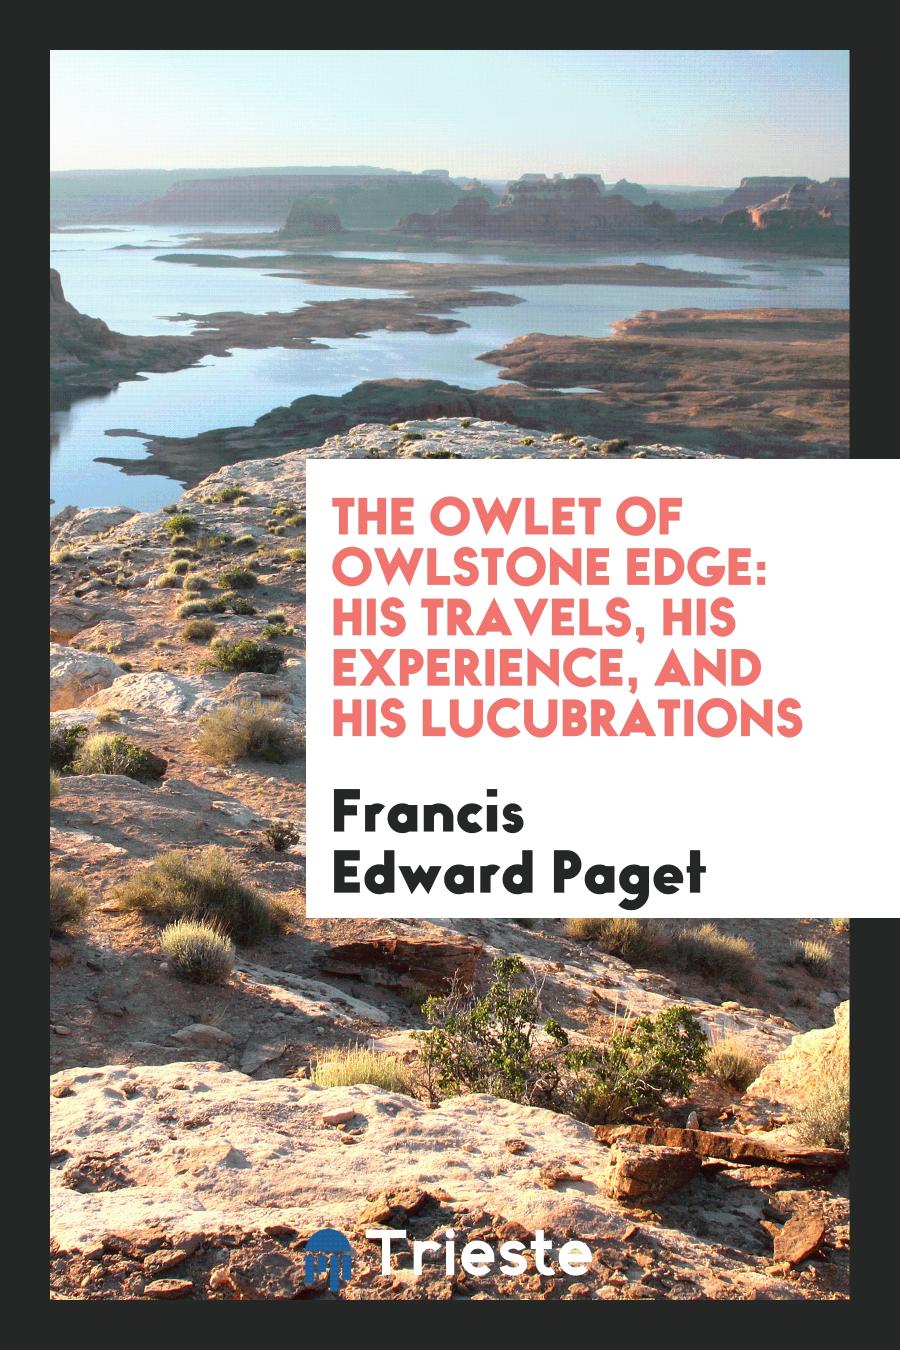 The Owlet of Owlstone Edge: His Travels, His Experience, and His Lucubrations